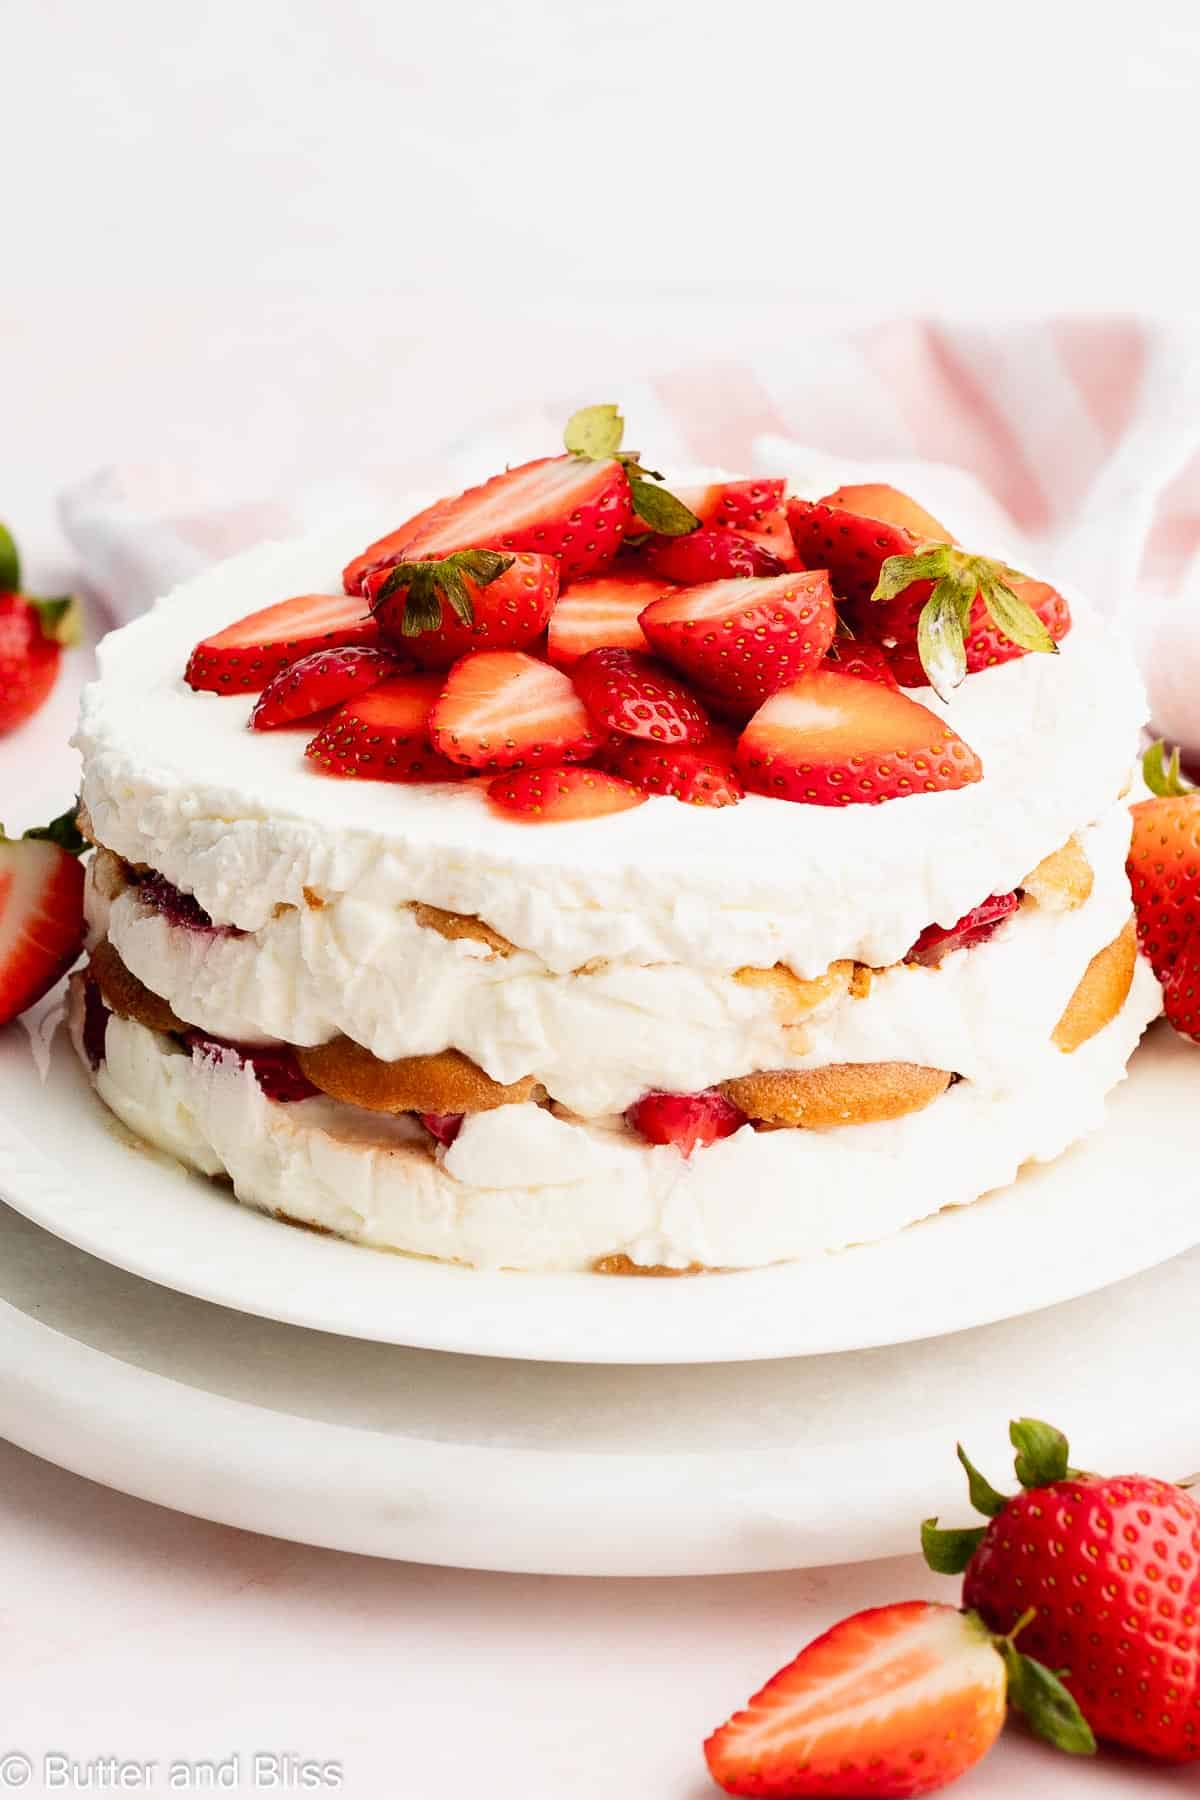 Pretty side view of all the layers in a small strawberry icebox cake on a white platter.